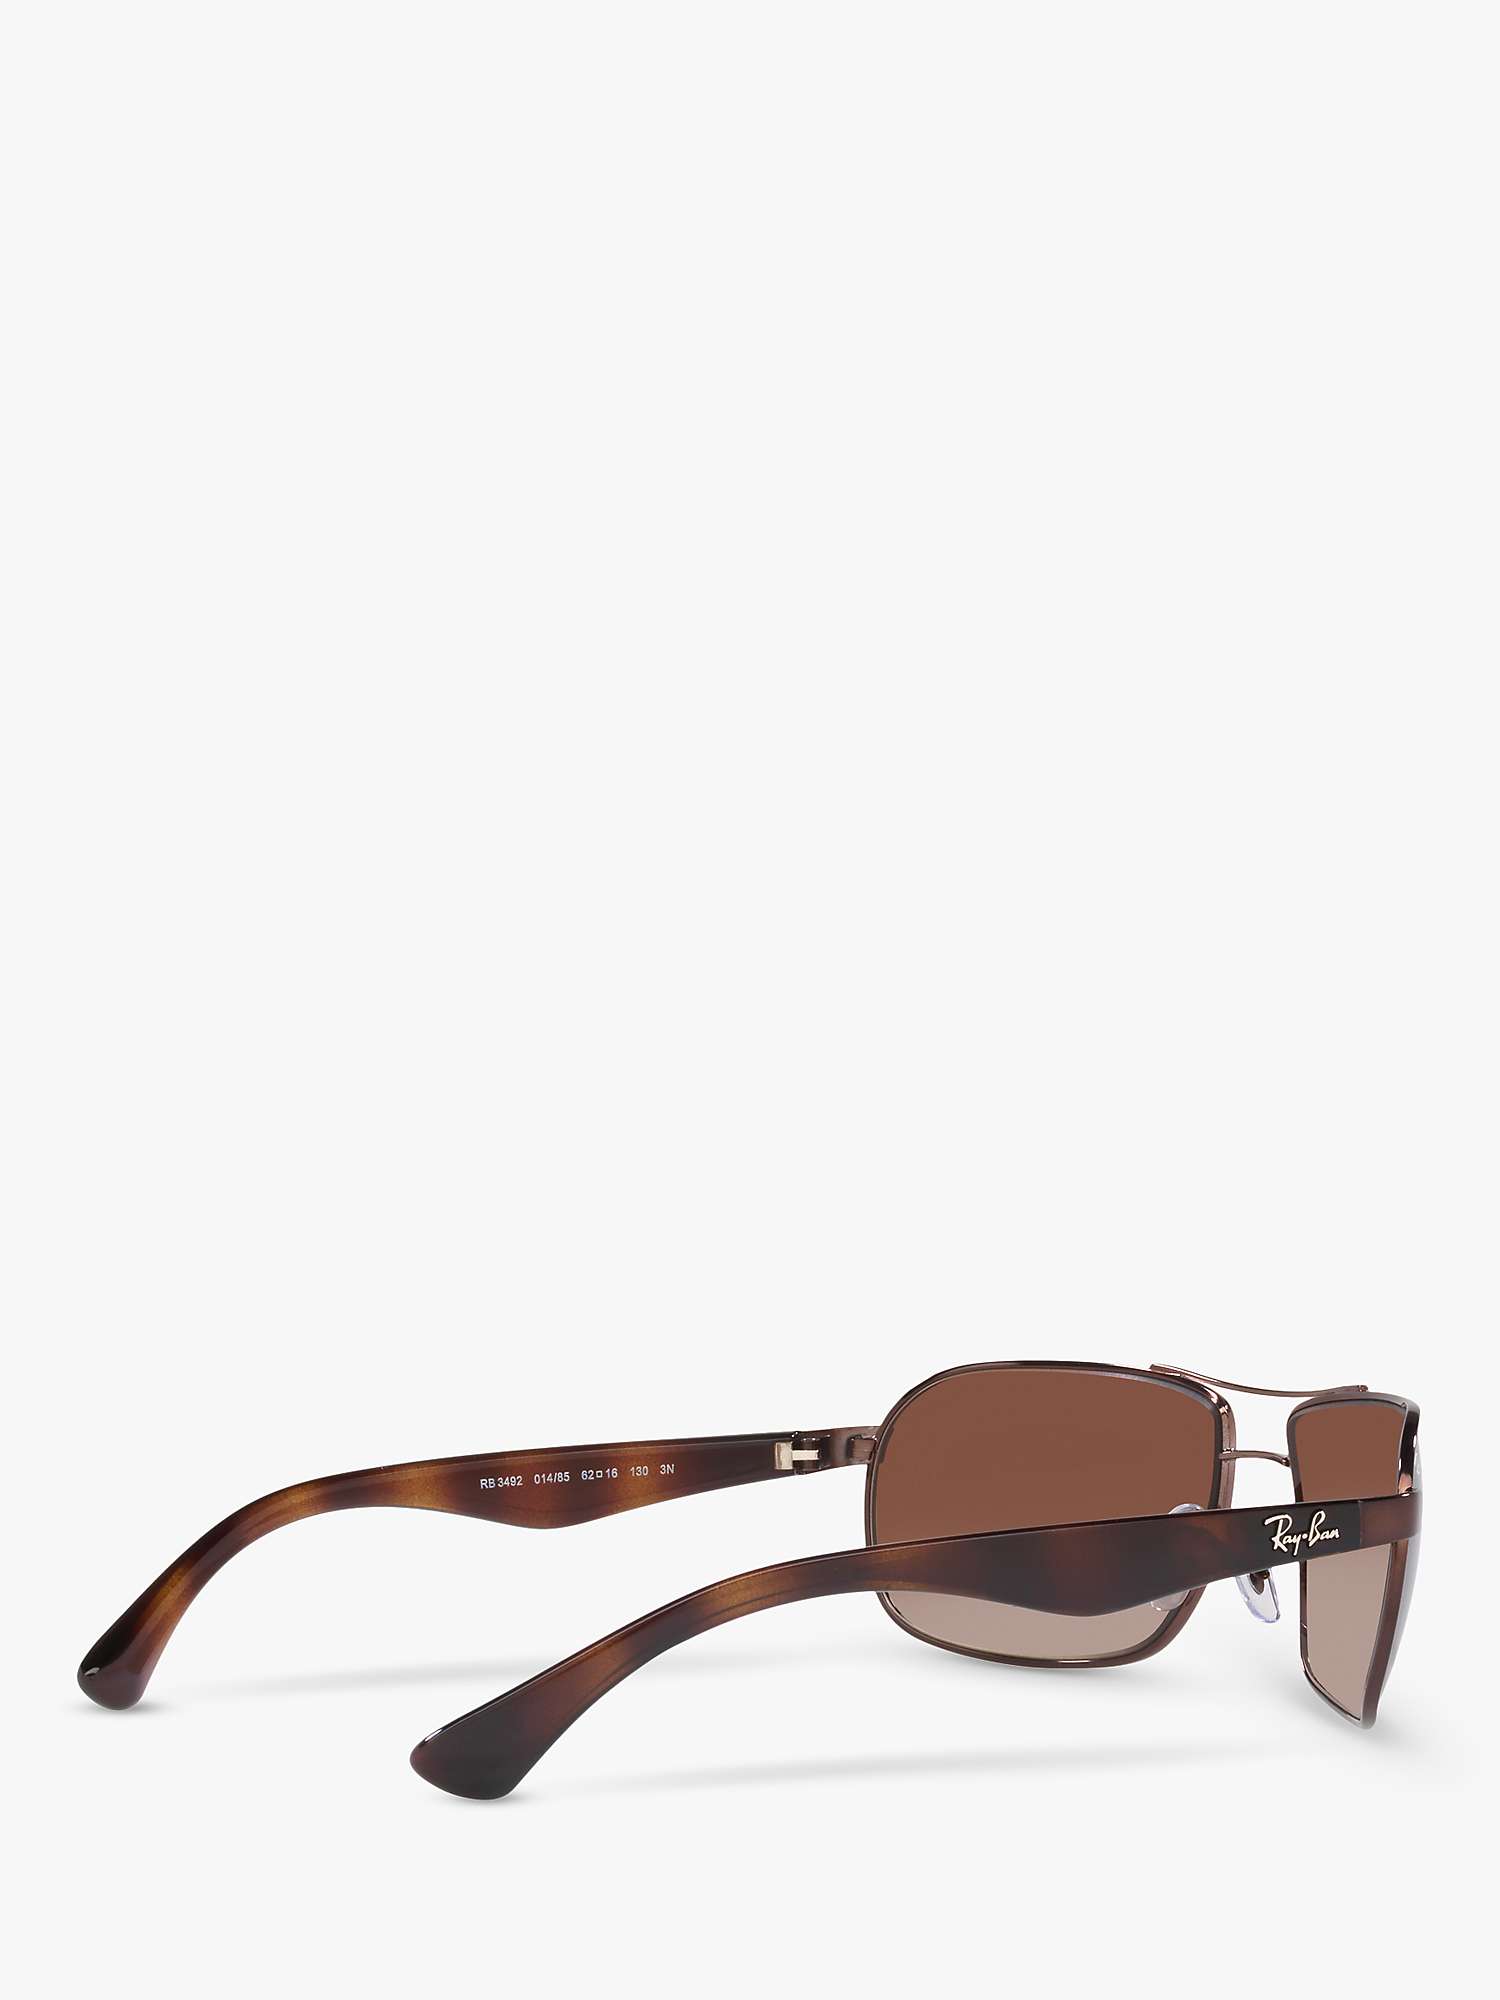 Buy Ray-Ban RB3492 Men's Square Sunglassess, Brown Online at johnlewis.com